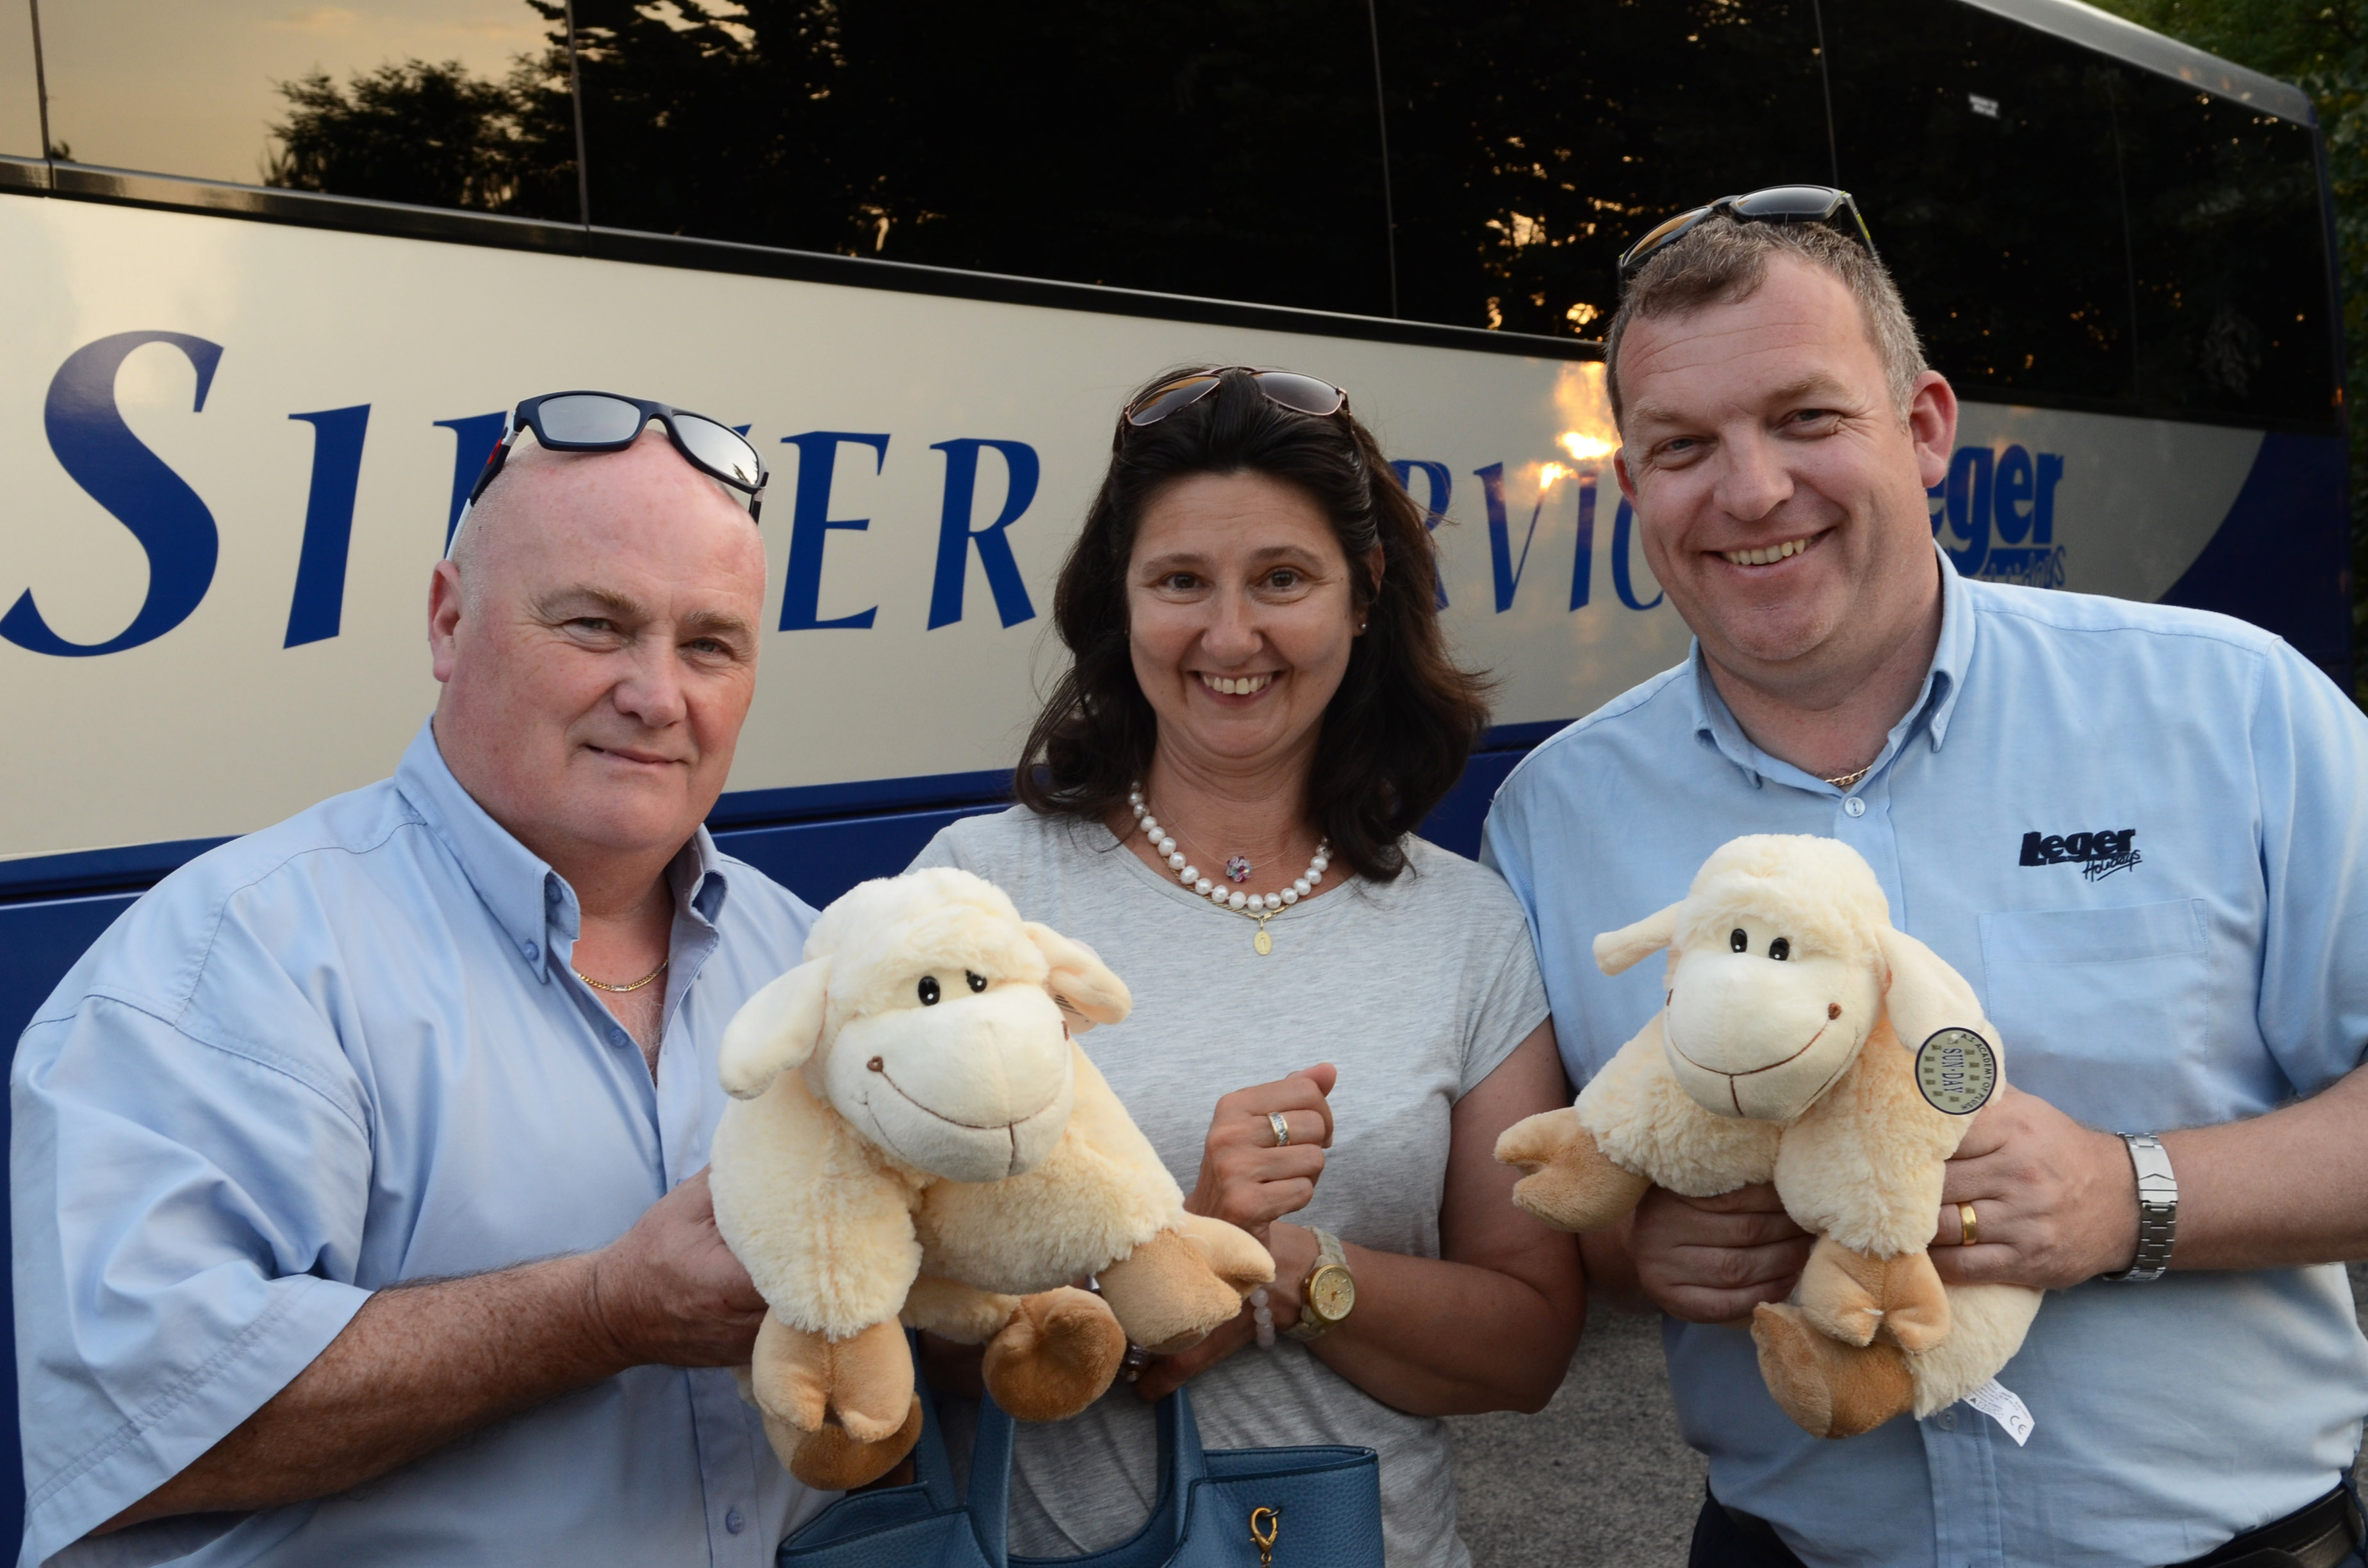 "Keiran and Mike present the Budapest guide with two cuddly sheep for her children"